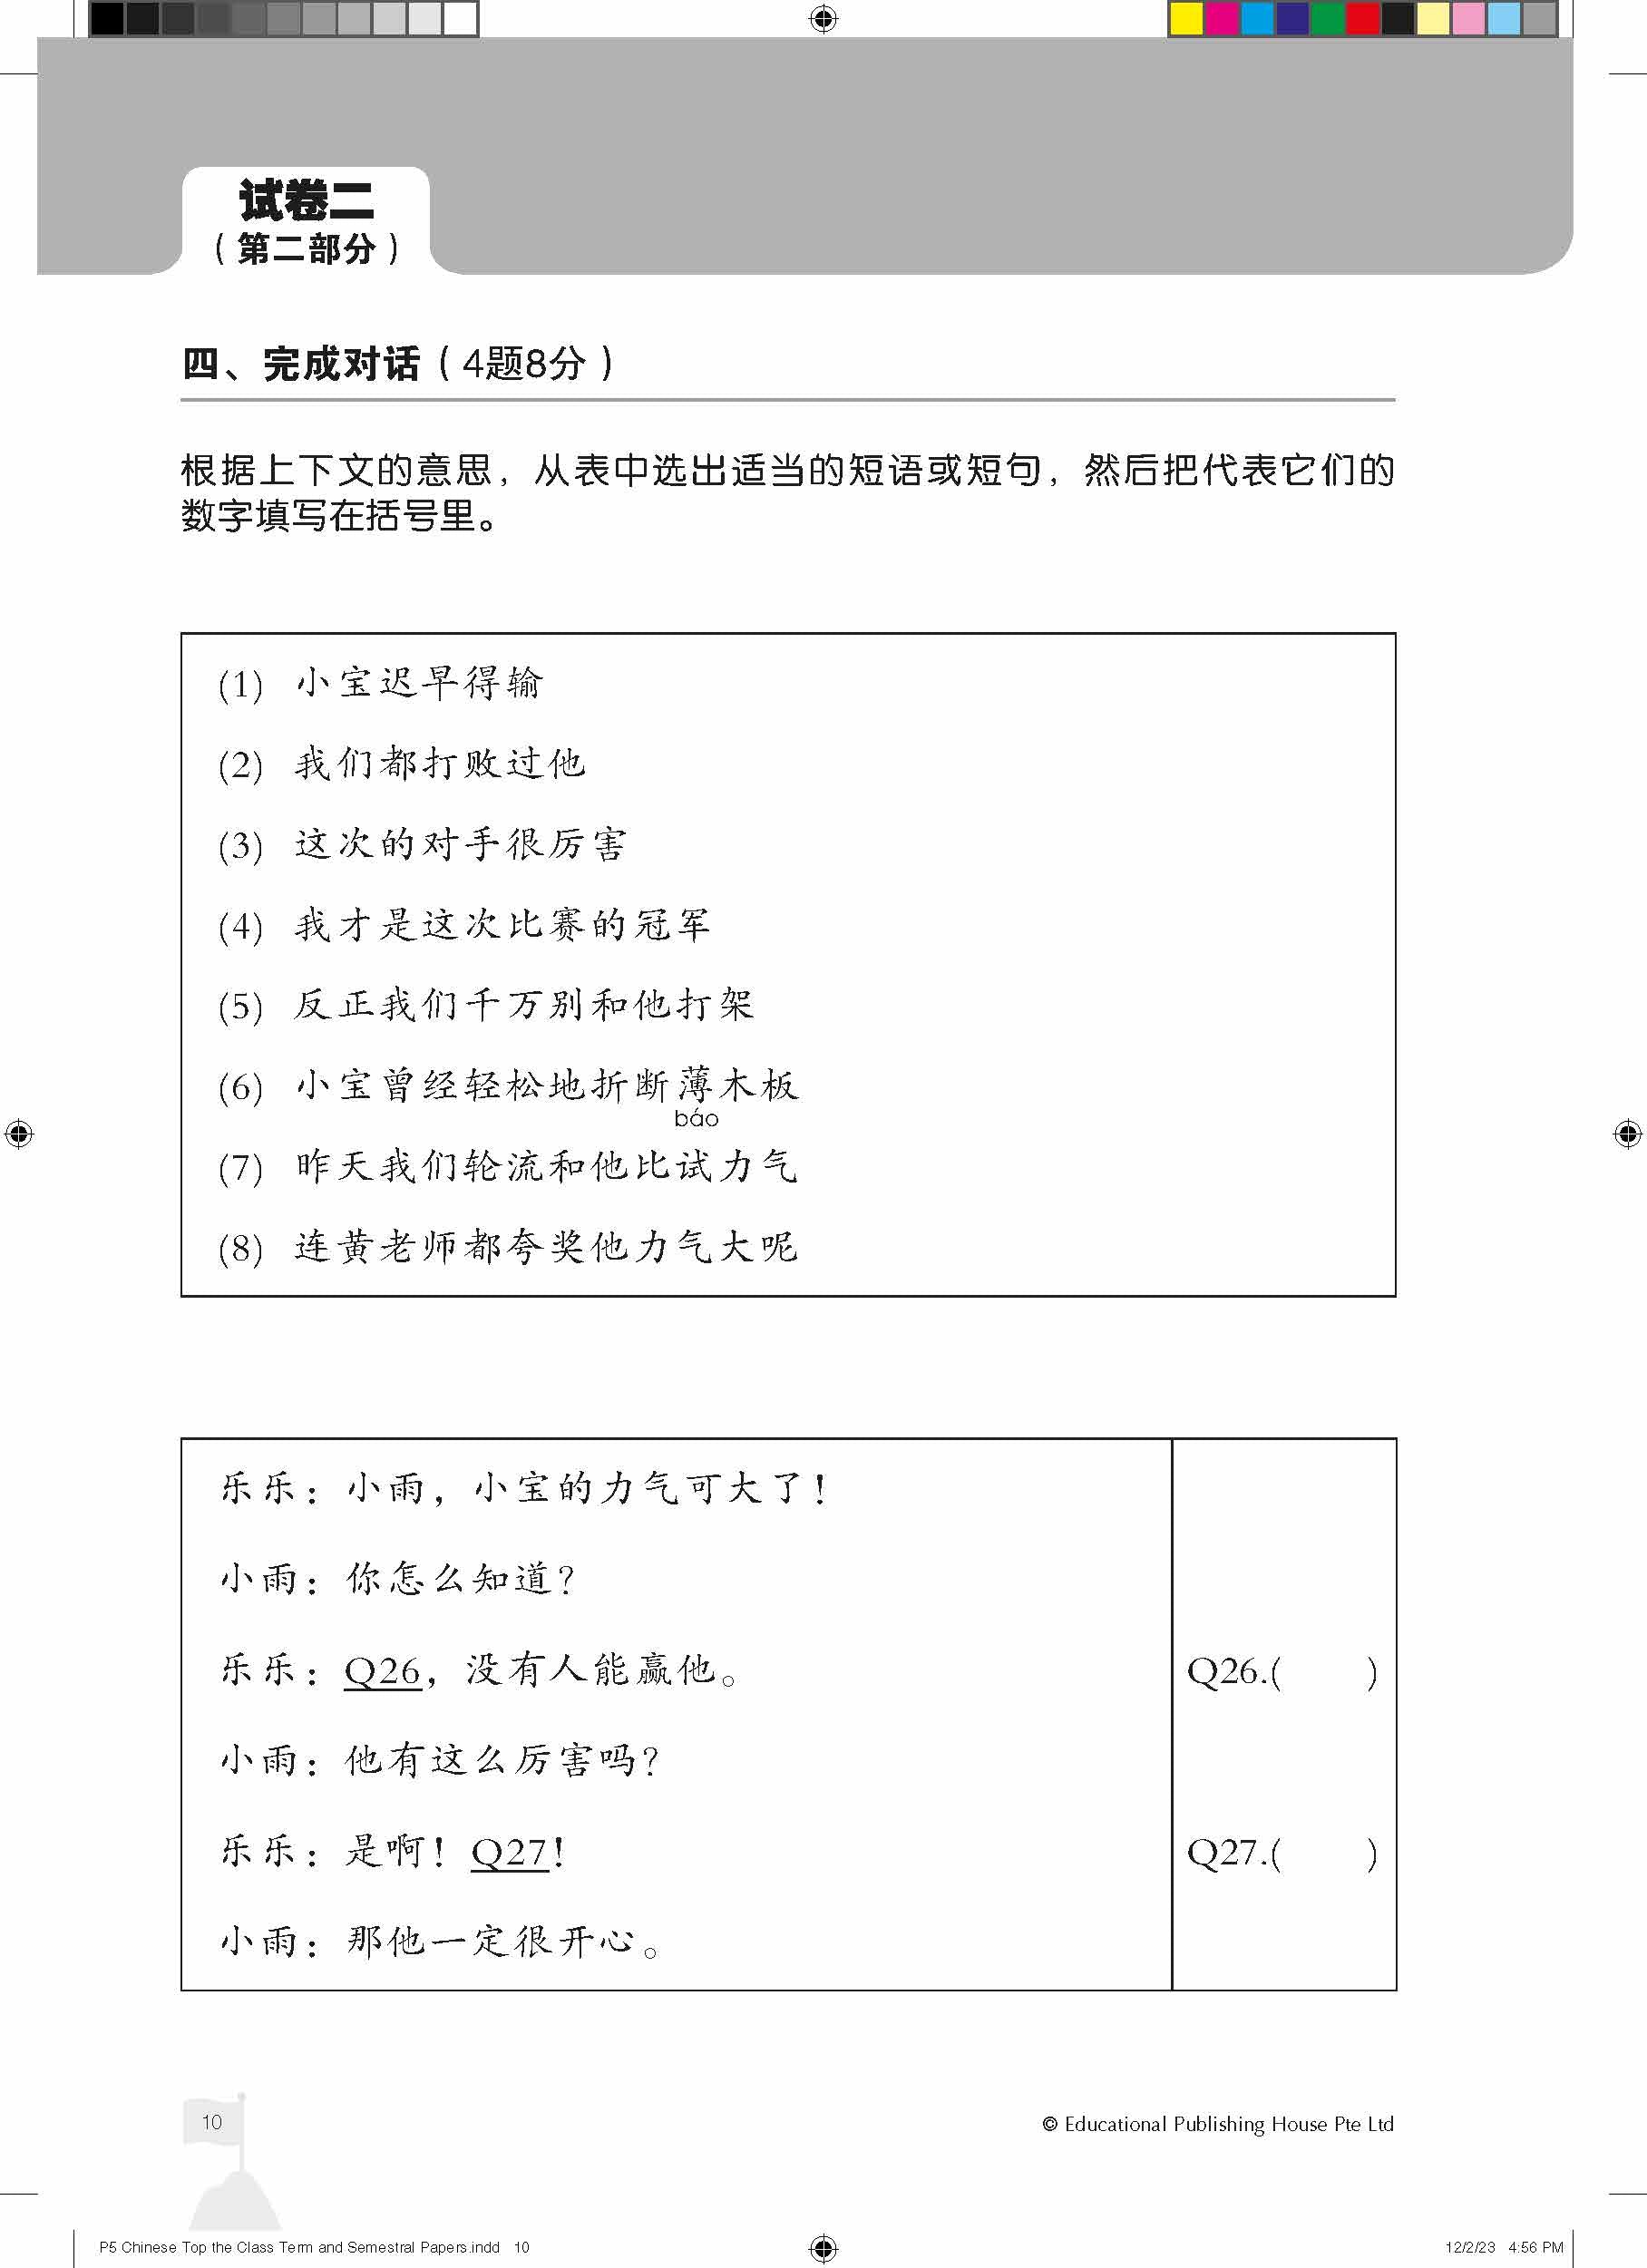 Primary 5 Chinese Top the Class Term & Semestral Papers - _MS, Assessment Books, EDUCATIONAL PUBLISHING HOUSE, PRIMARY 5, PRIMARY 6, 李妍